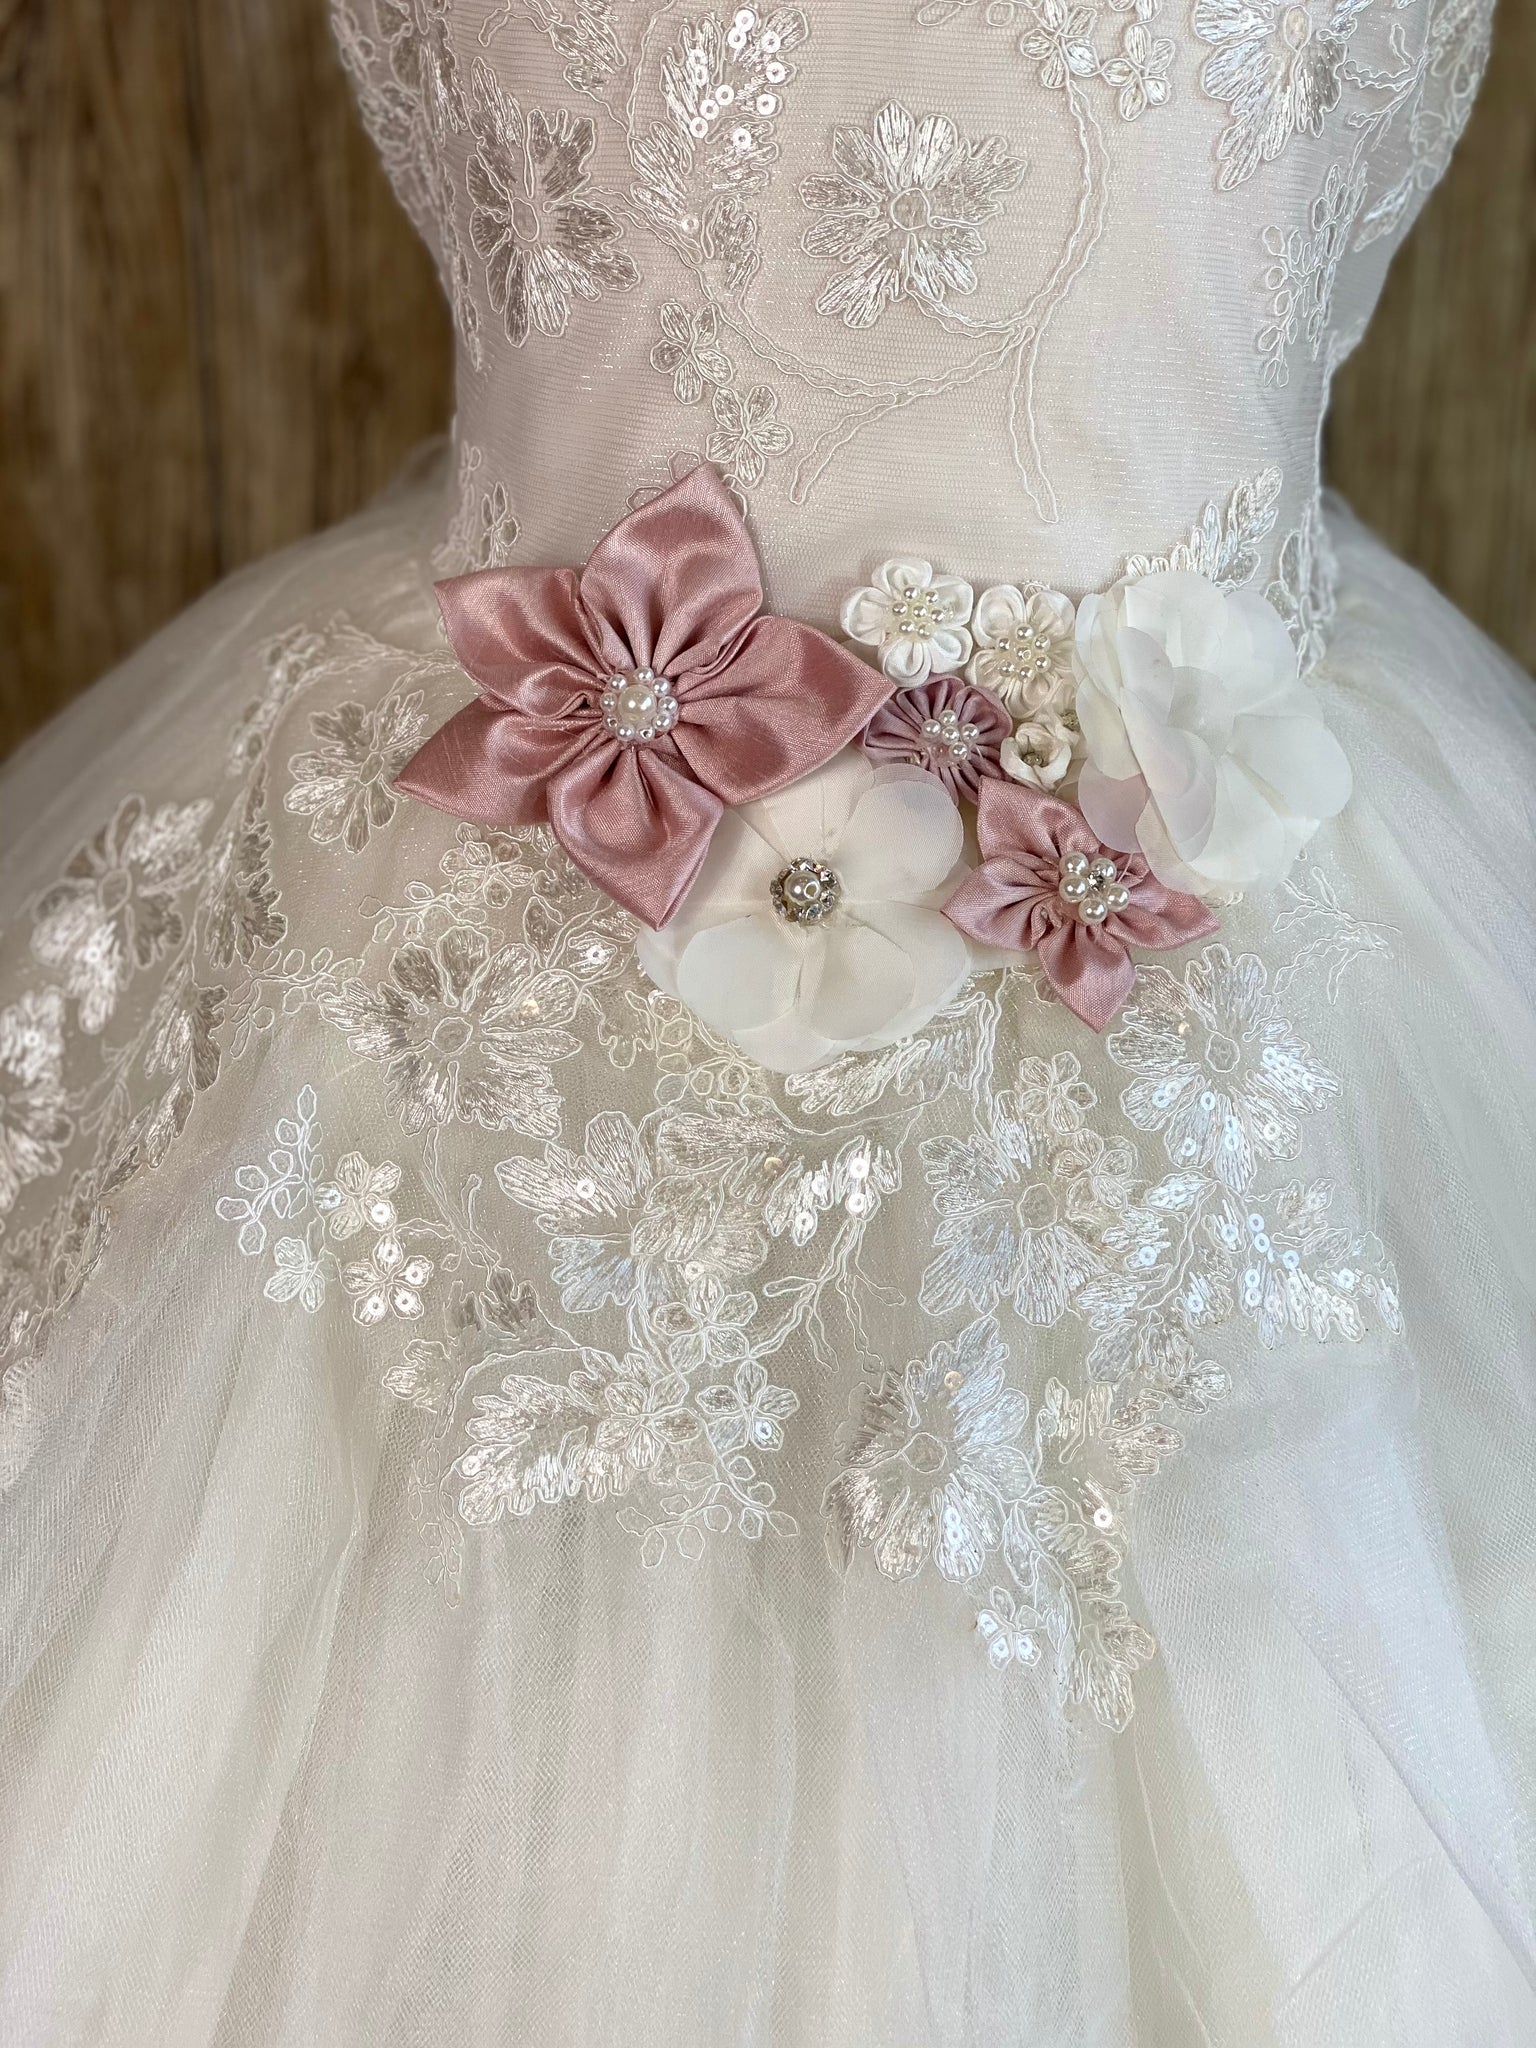 White, size 10 Scoop neck Floral lace bodice Embroidered floral lace detailing going diagonal on skirt Pearl flowers around lower bodice (mauve and white in color) Keyhole back with button closures Big satin bow on back